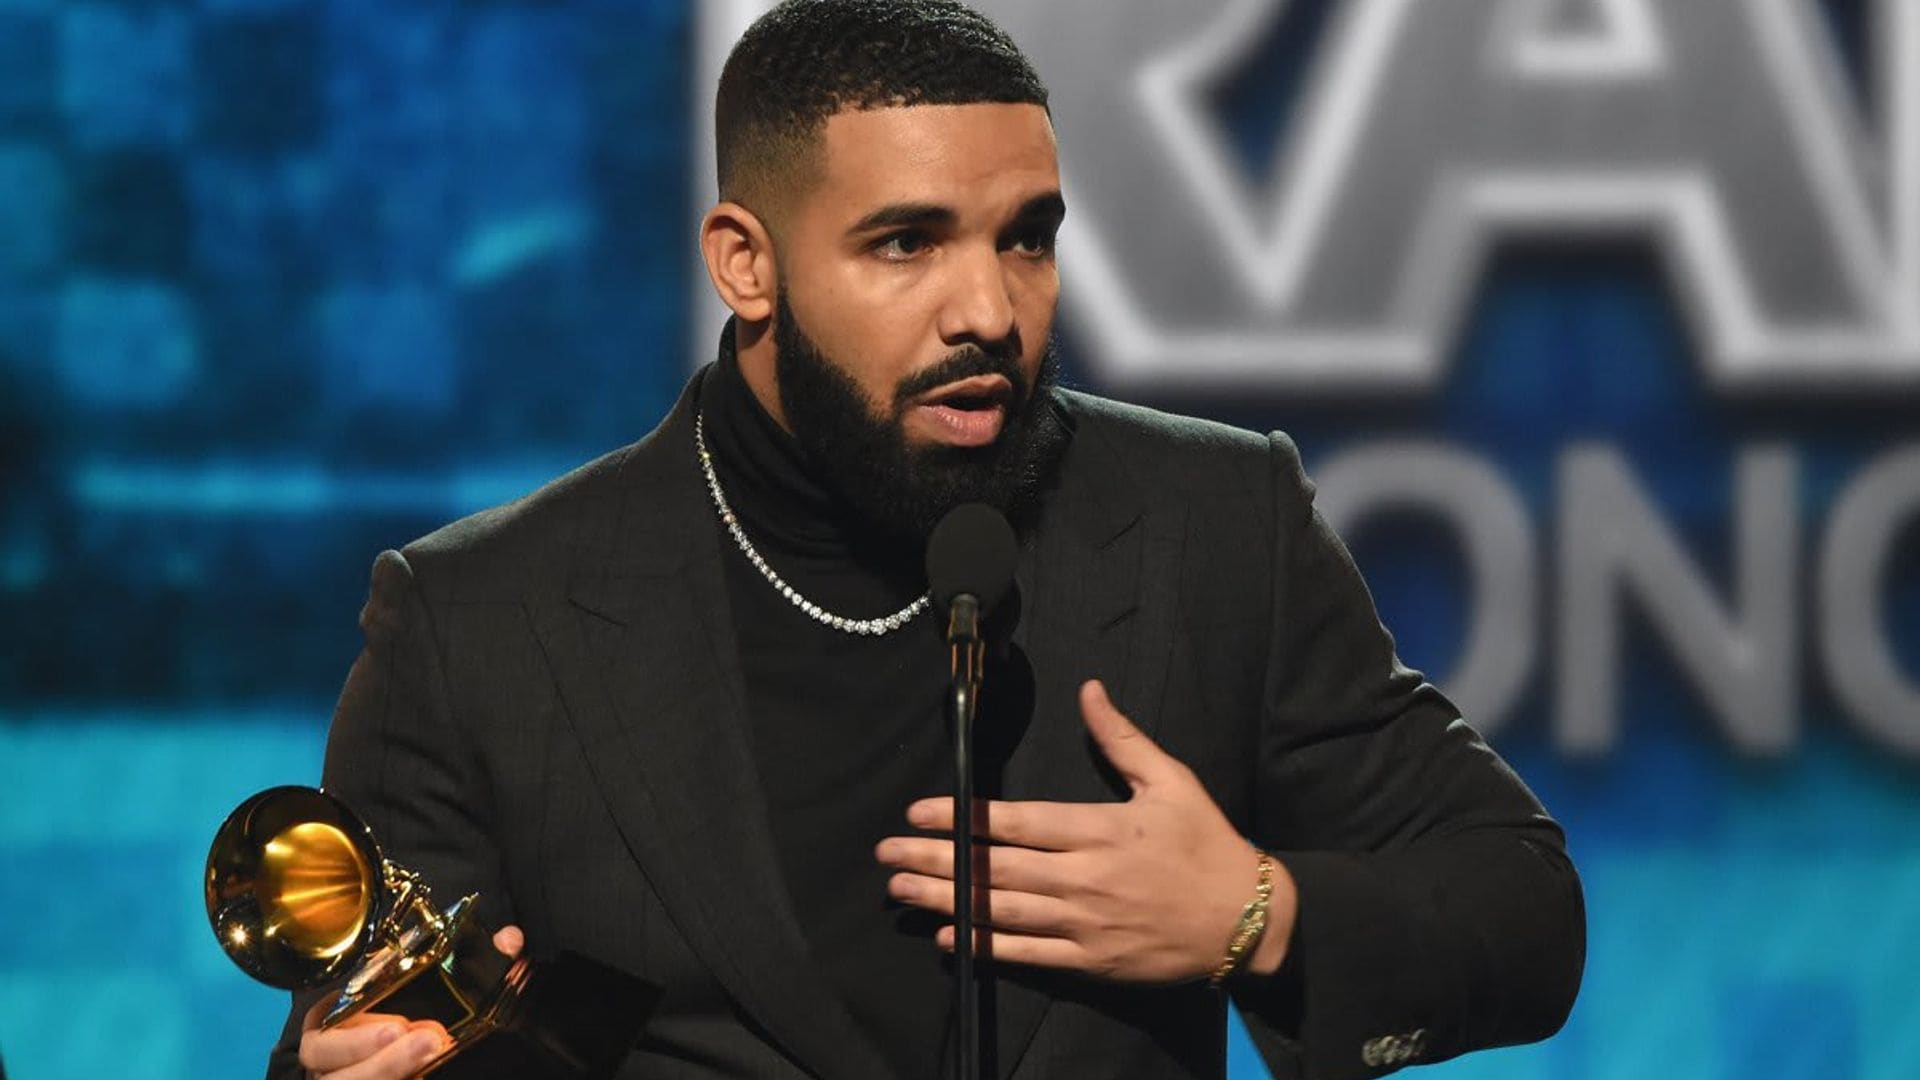 Why did Drake withdraw his 2021 Grammy nominations?